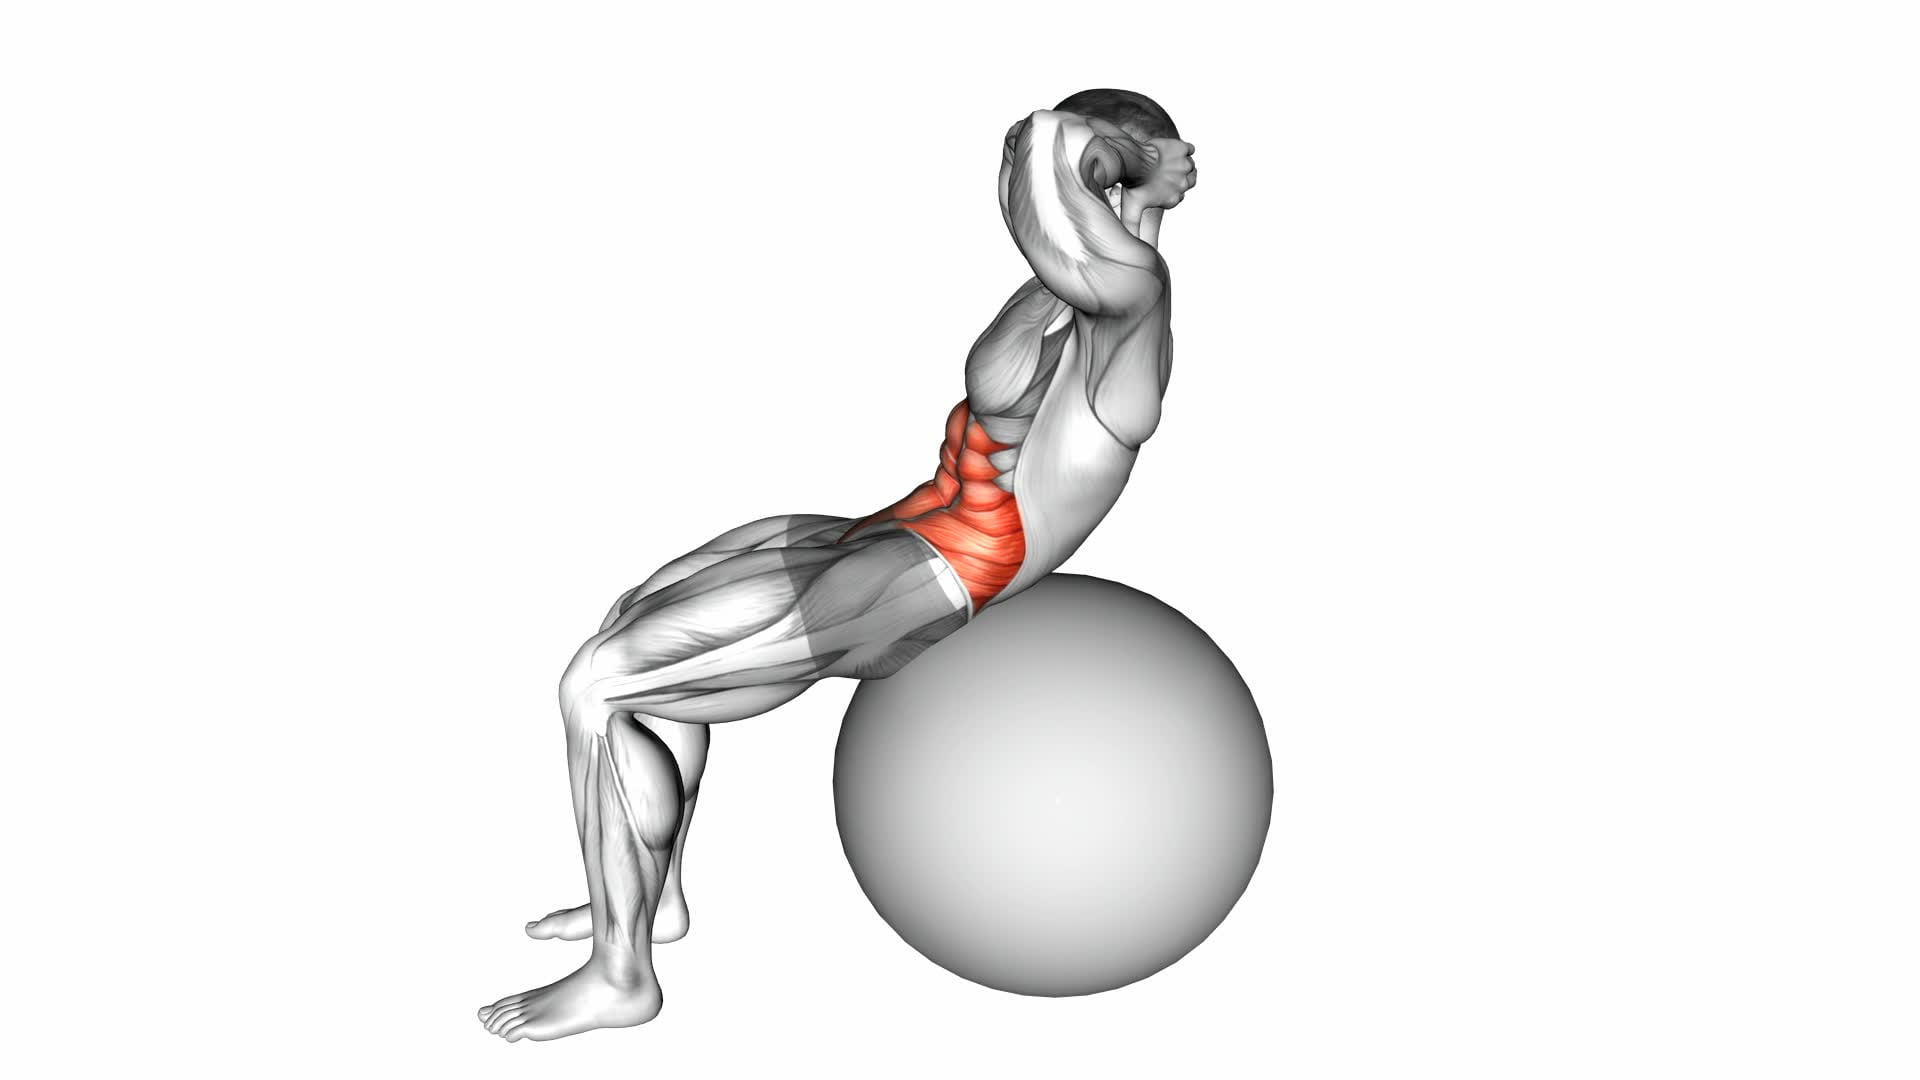 Stability Ball Crunch (Full Range Hands Behind Head) - Video Exercise Guide & Tips